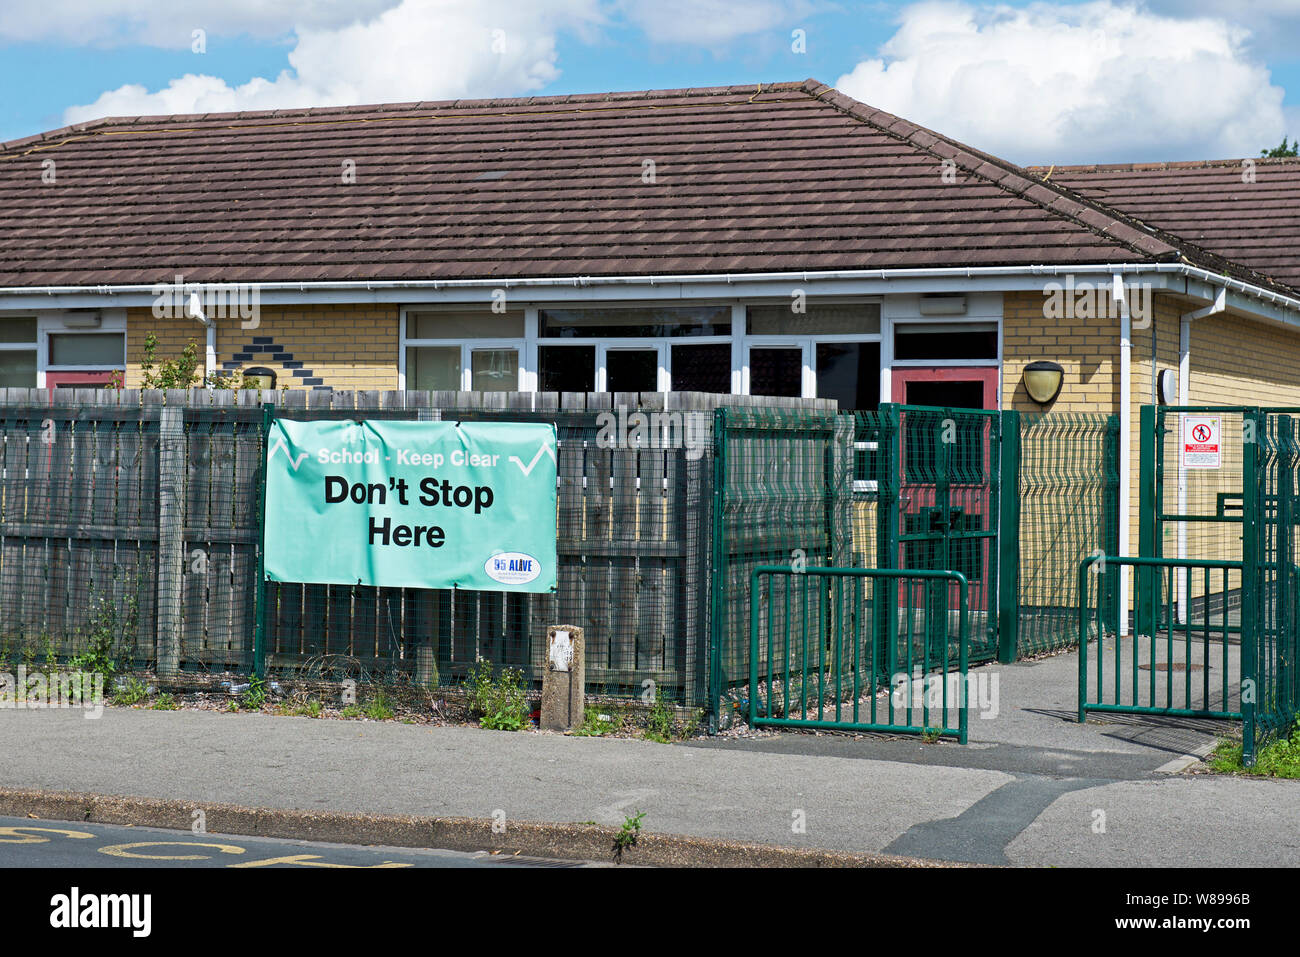 Sign - Don't Stop Here - outside primary school, England UK Stock Photo